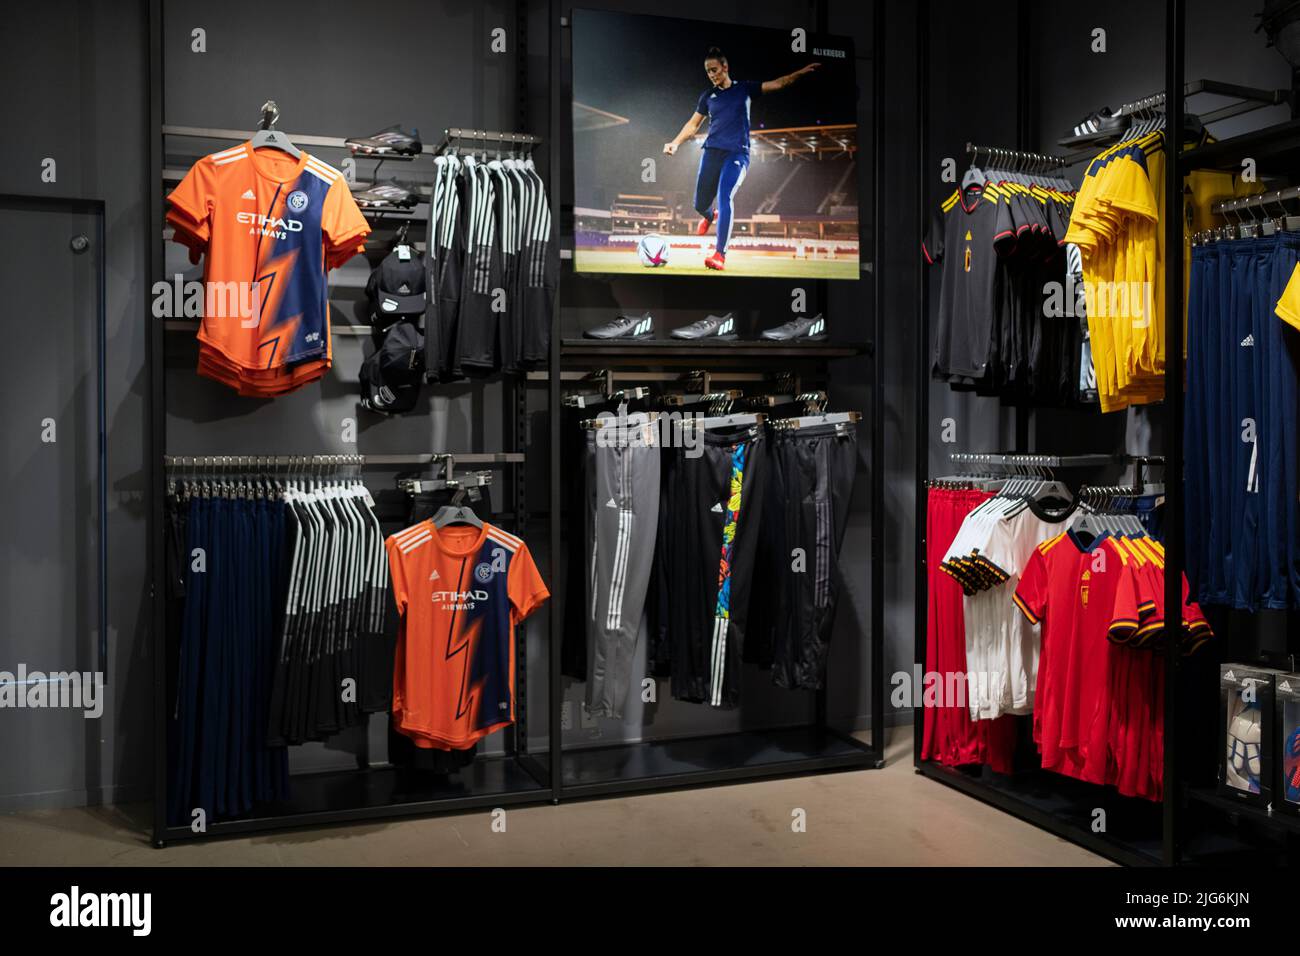 Soccer clothing for women on sale at the adidas store on Broadway in lower manhattan, NYC. Features colorful jerseys and a big photo of Ali Kreiger. Stock Photo